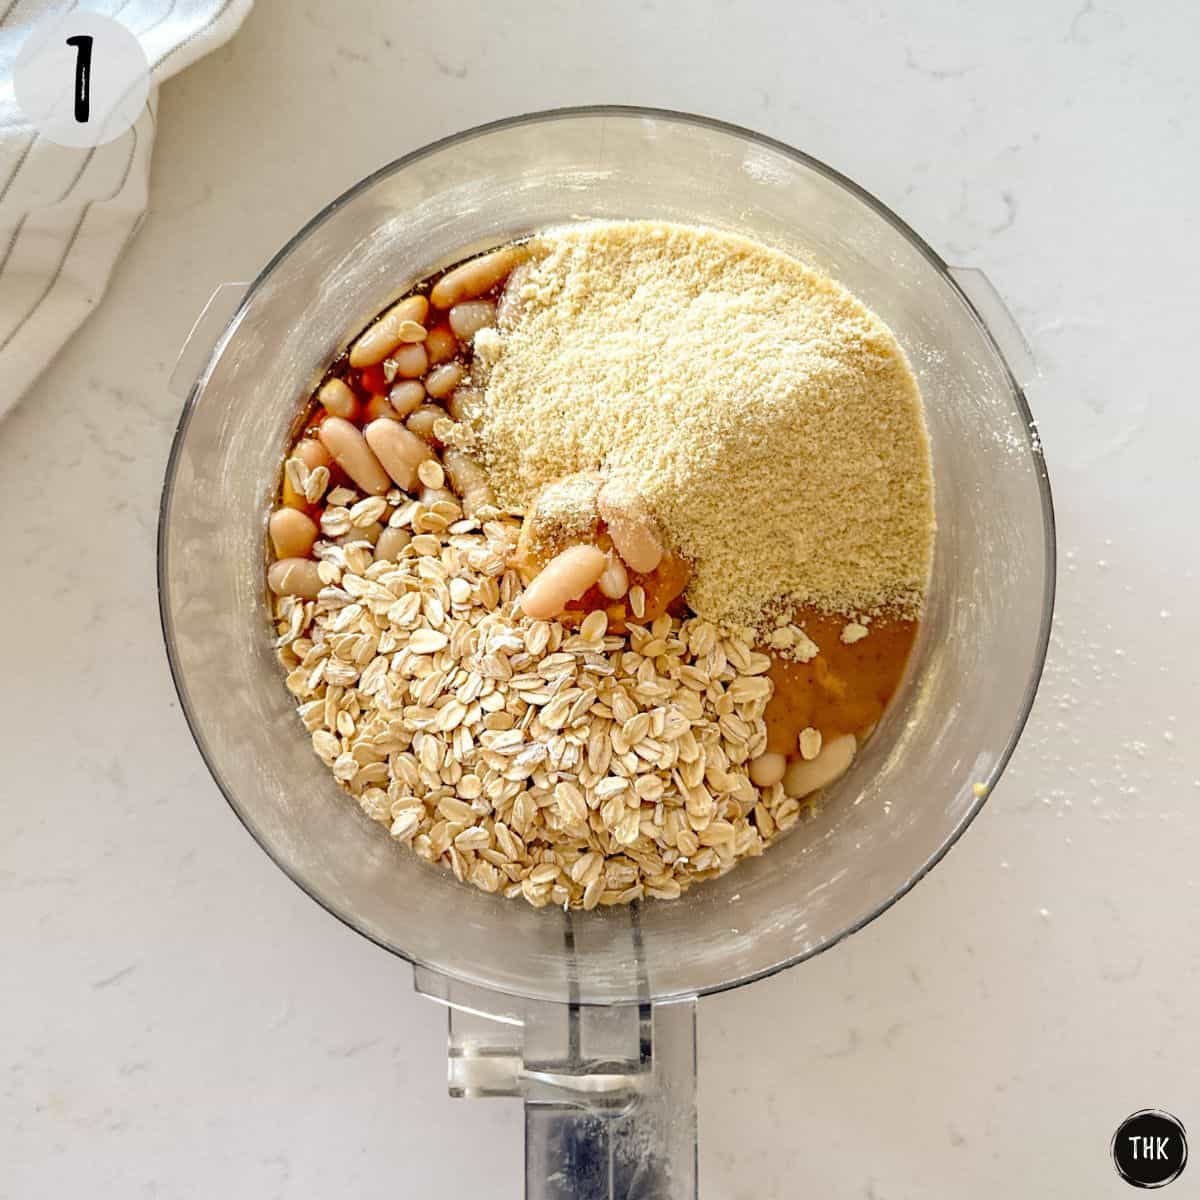 Food processor with oats, white beans, almond flour and peanut butter.